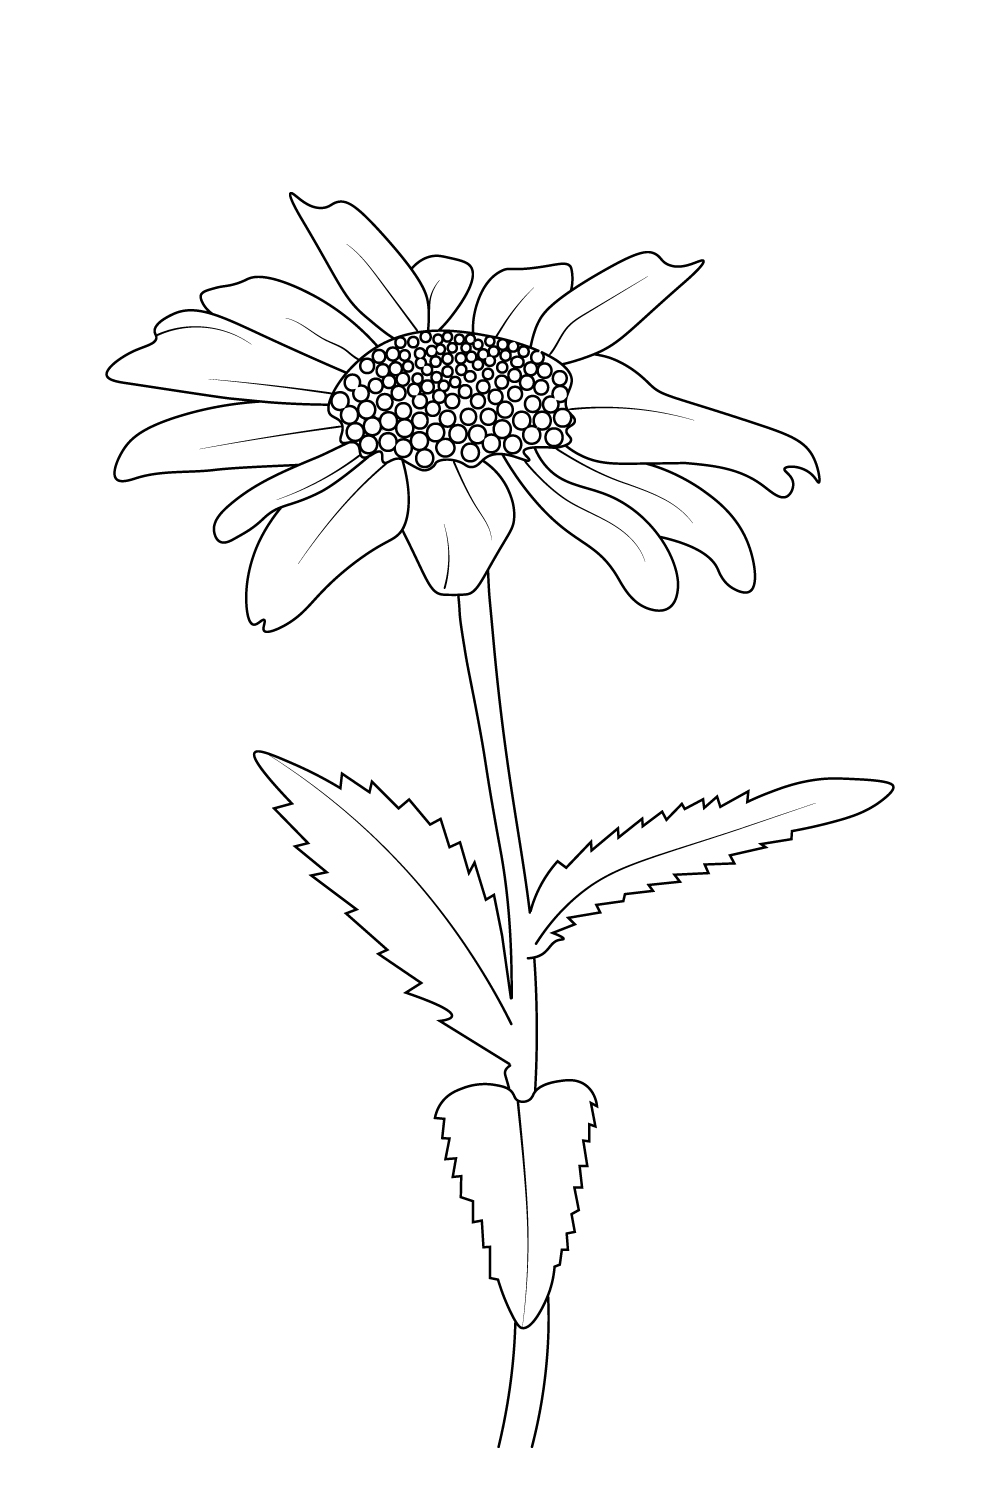 simple minimills daisy flower line drawing, daisy flower drawing for kids pinterest preview image.